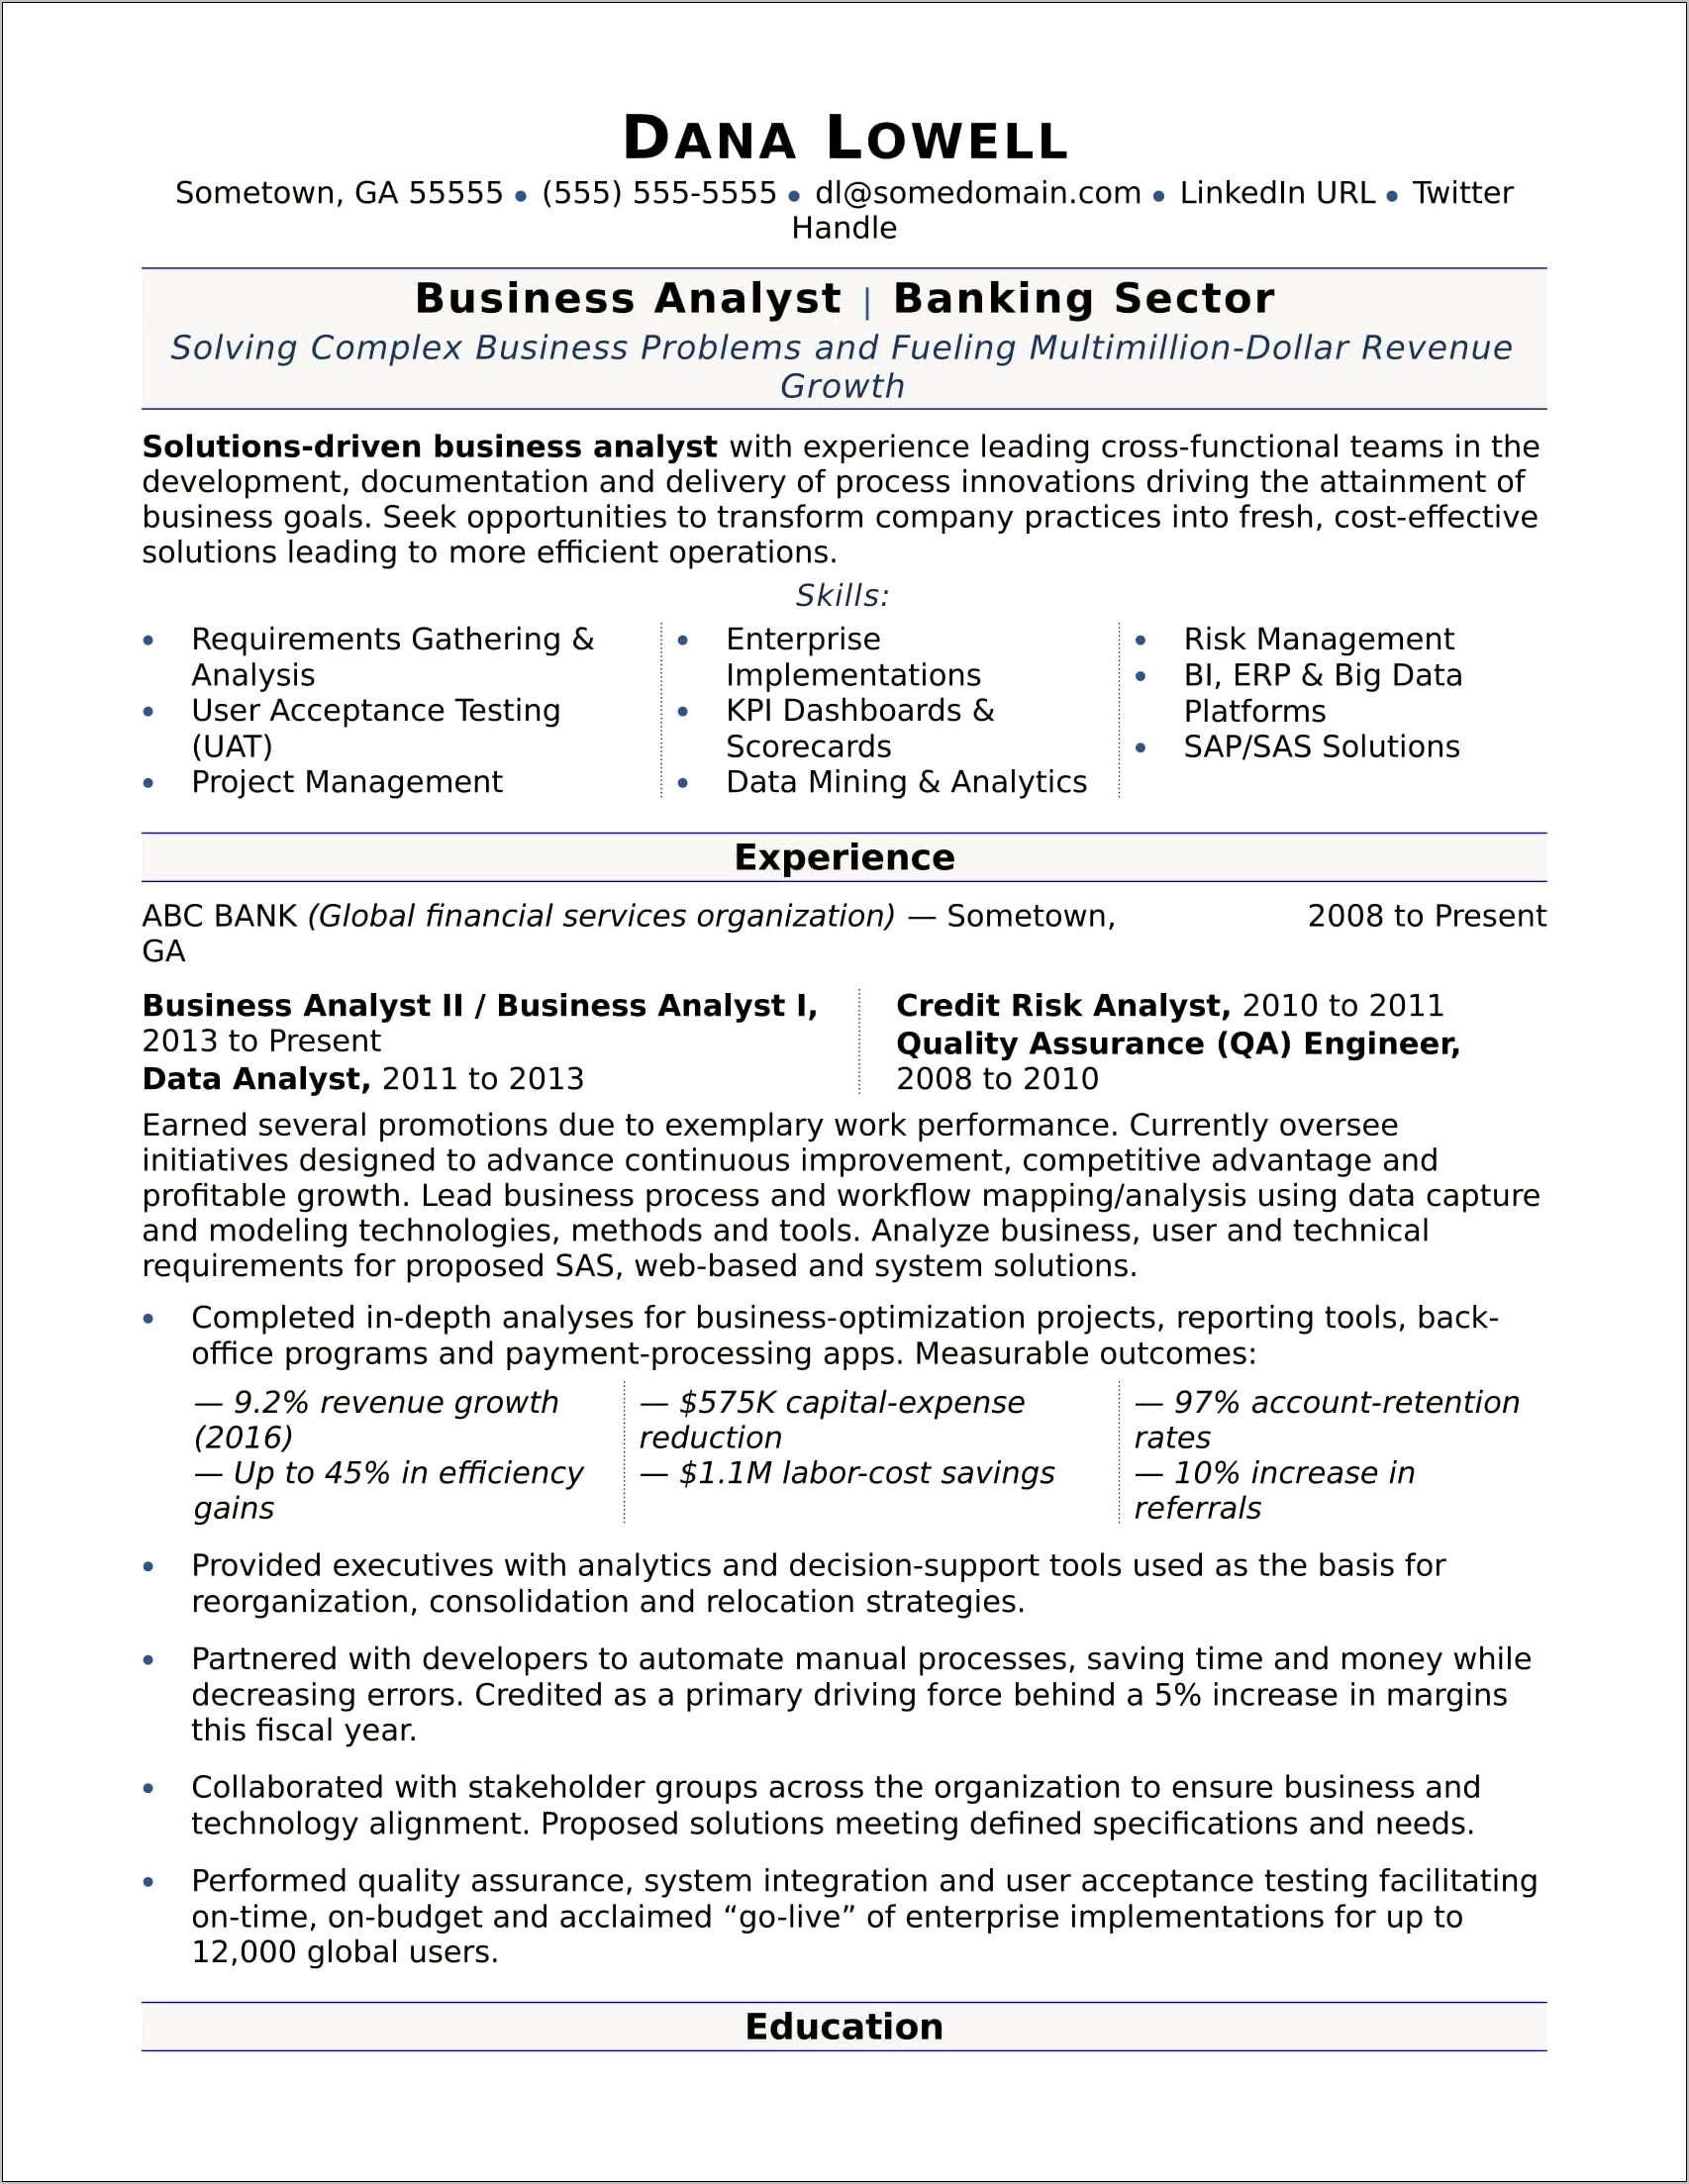 Business System Analyst Resume Objective